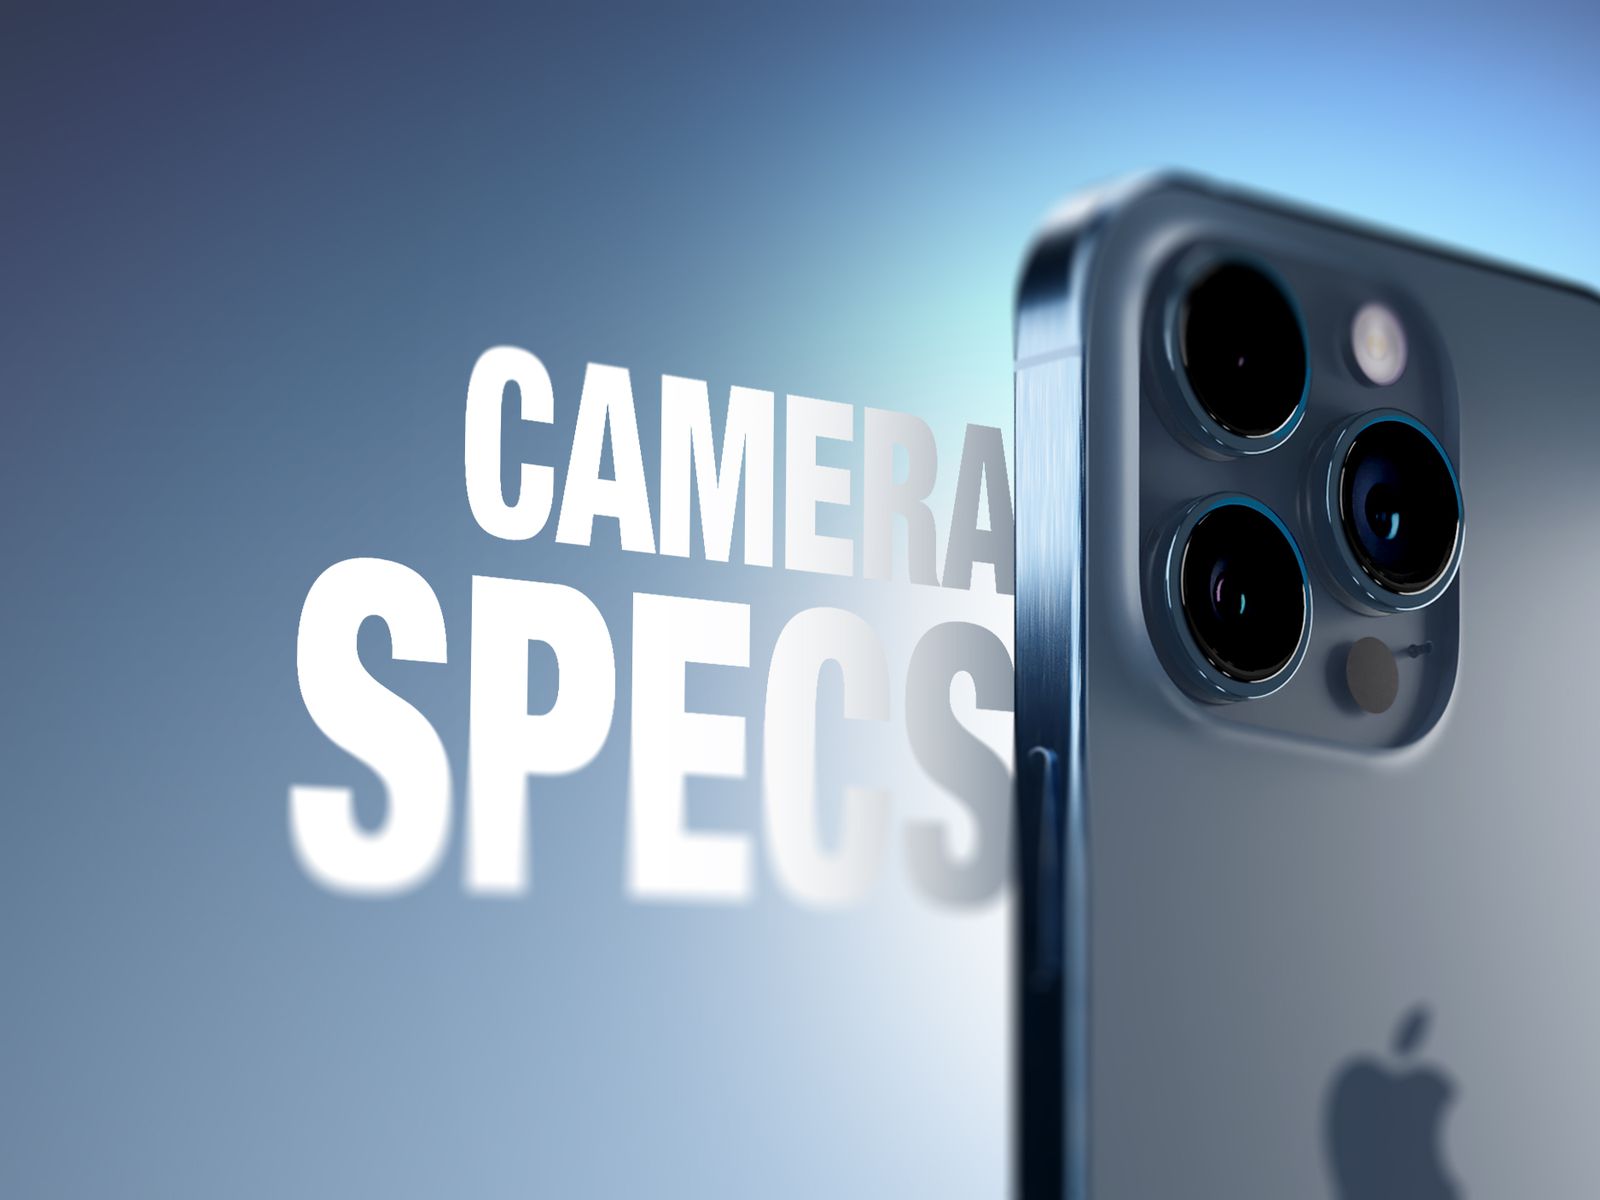 Which iPhone 15 should you get? Comparing price, specs, cameras - Mobile